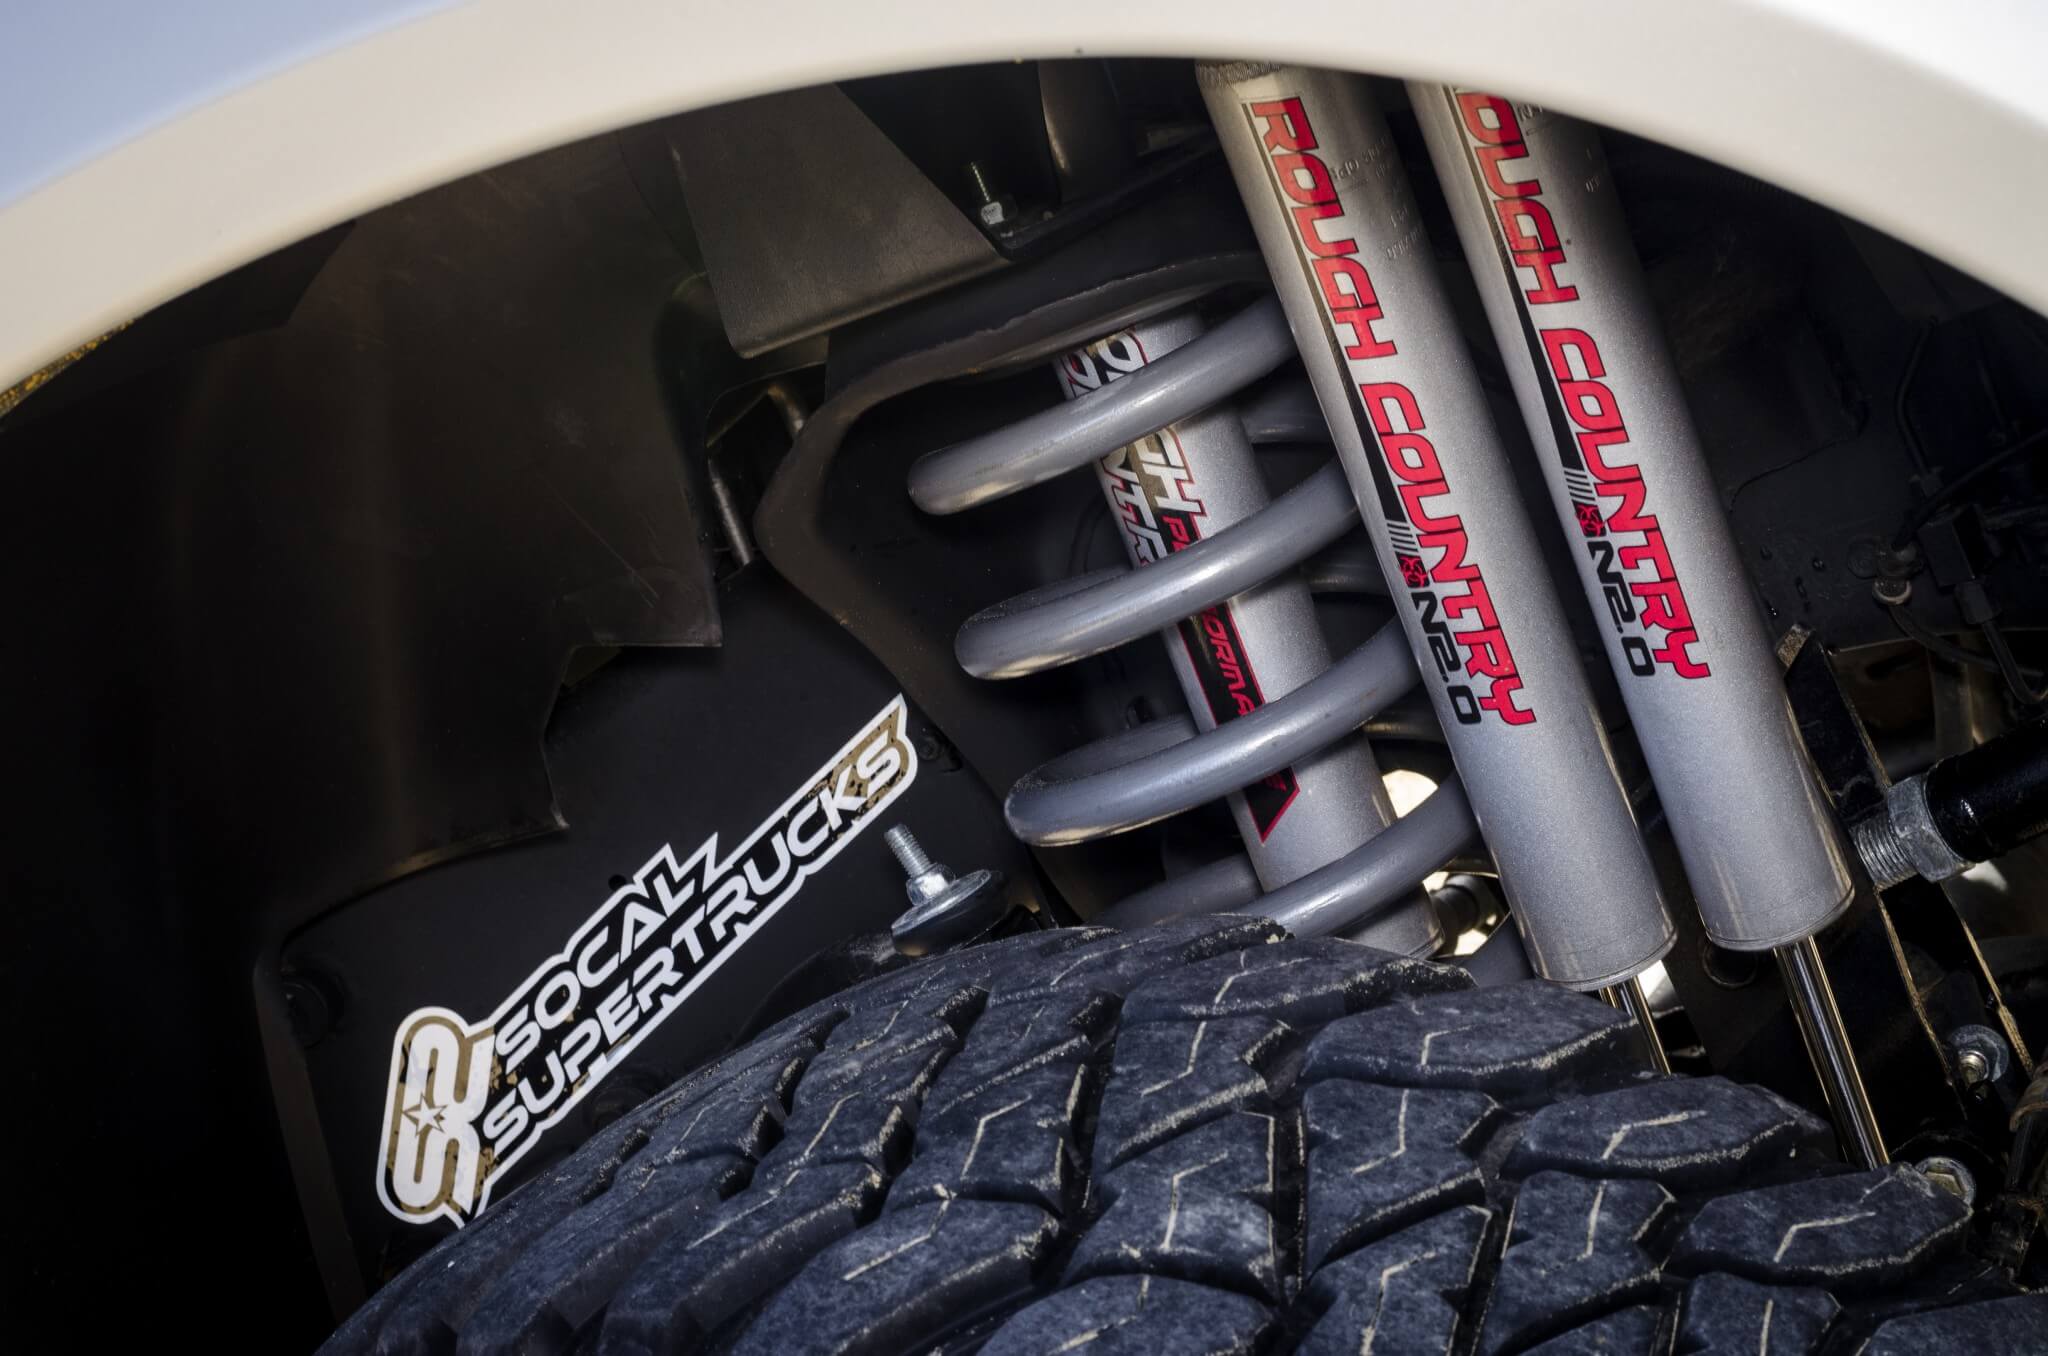 Triple N2.2 performance shocks from Rough Country control the front suspension.